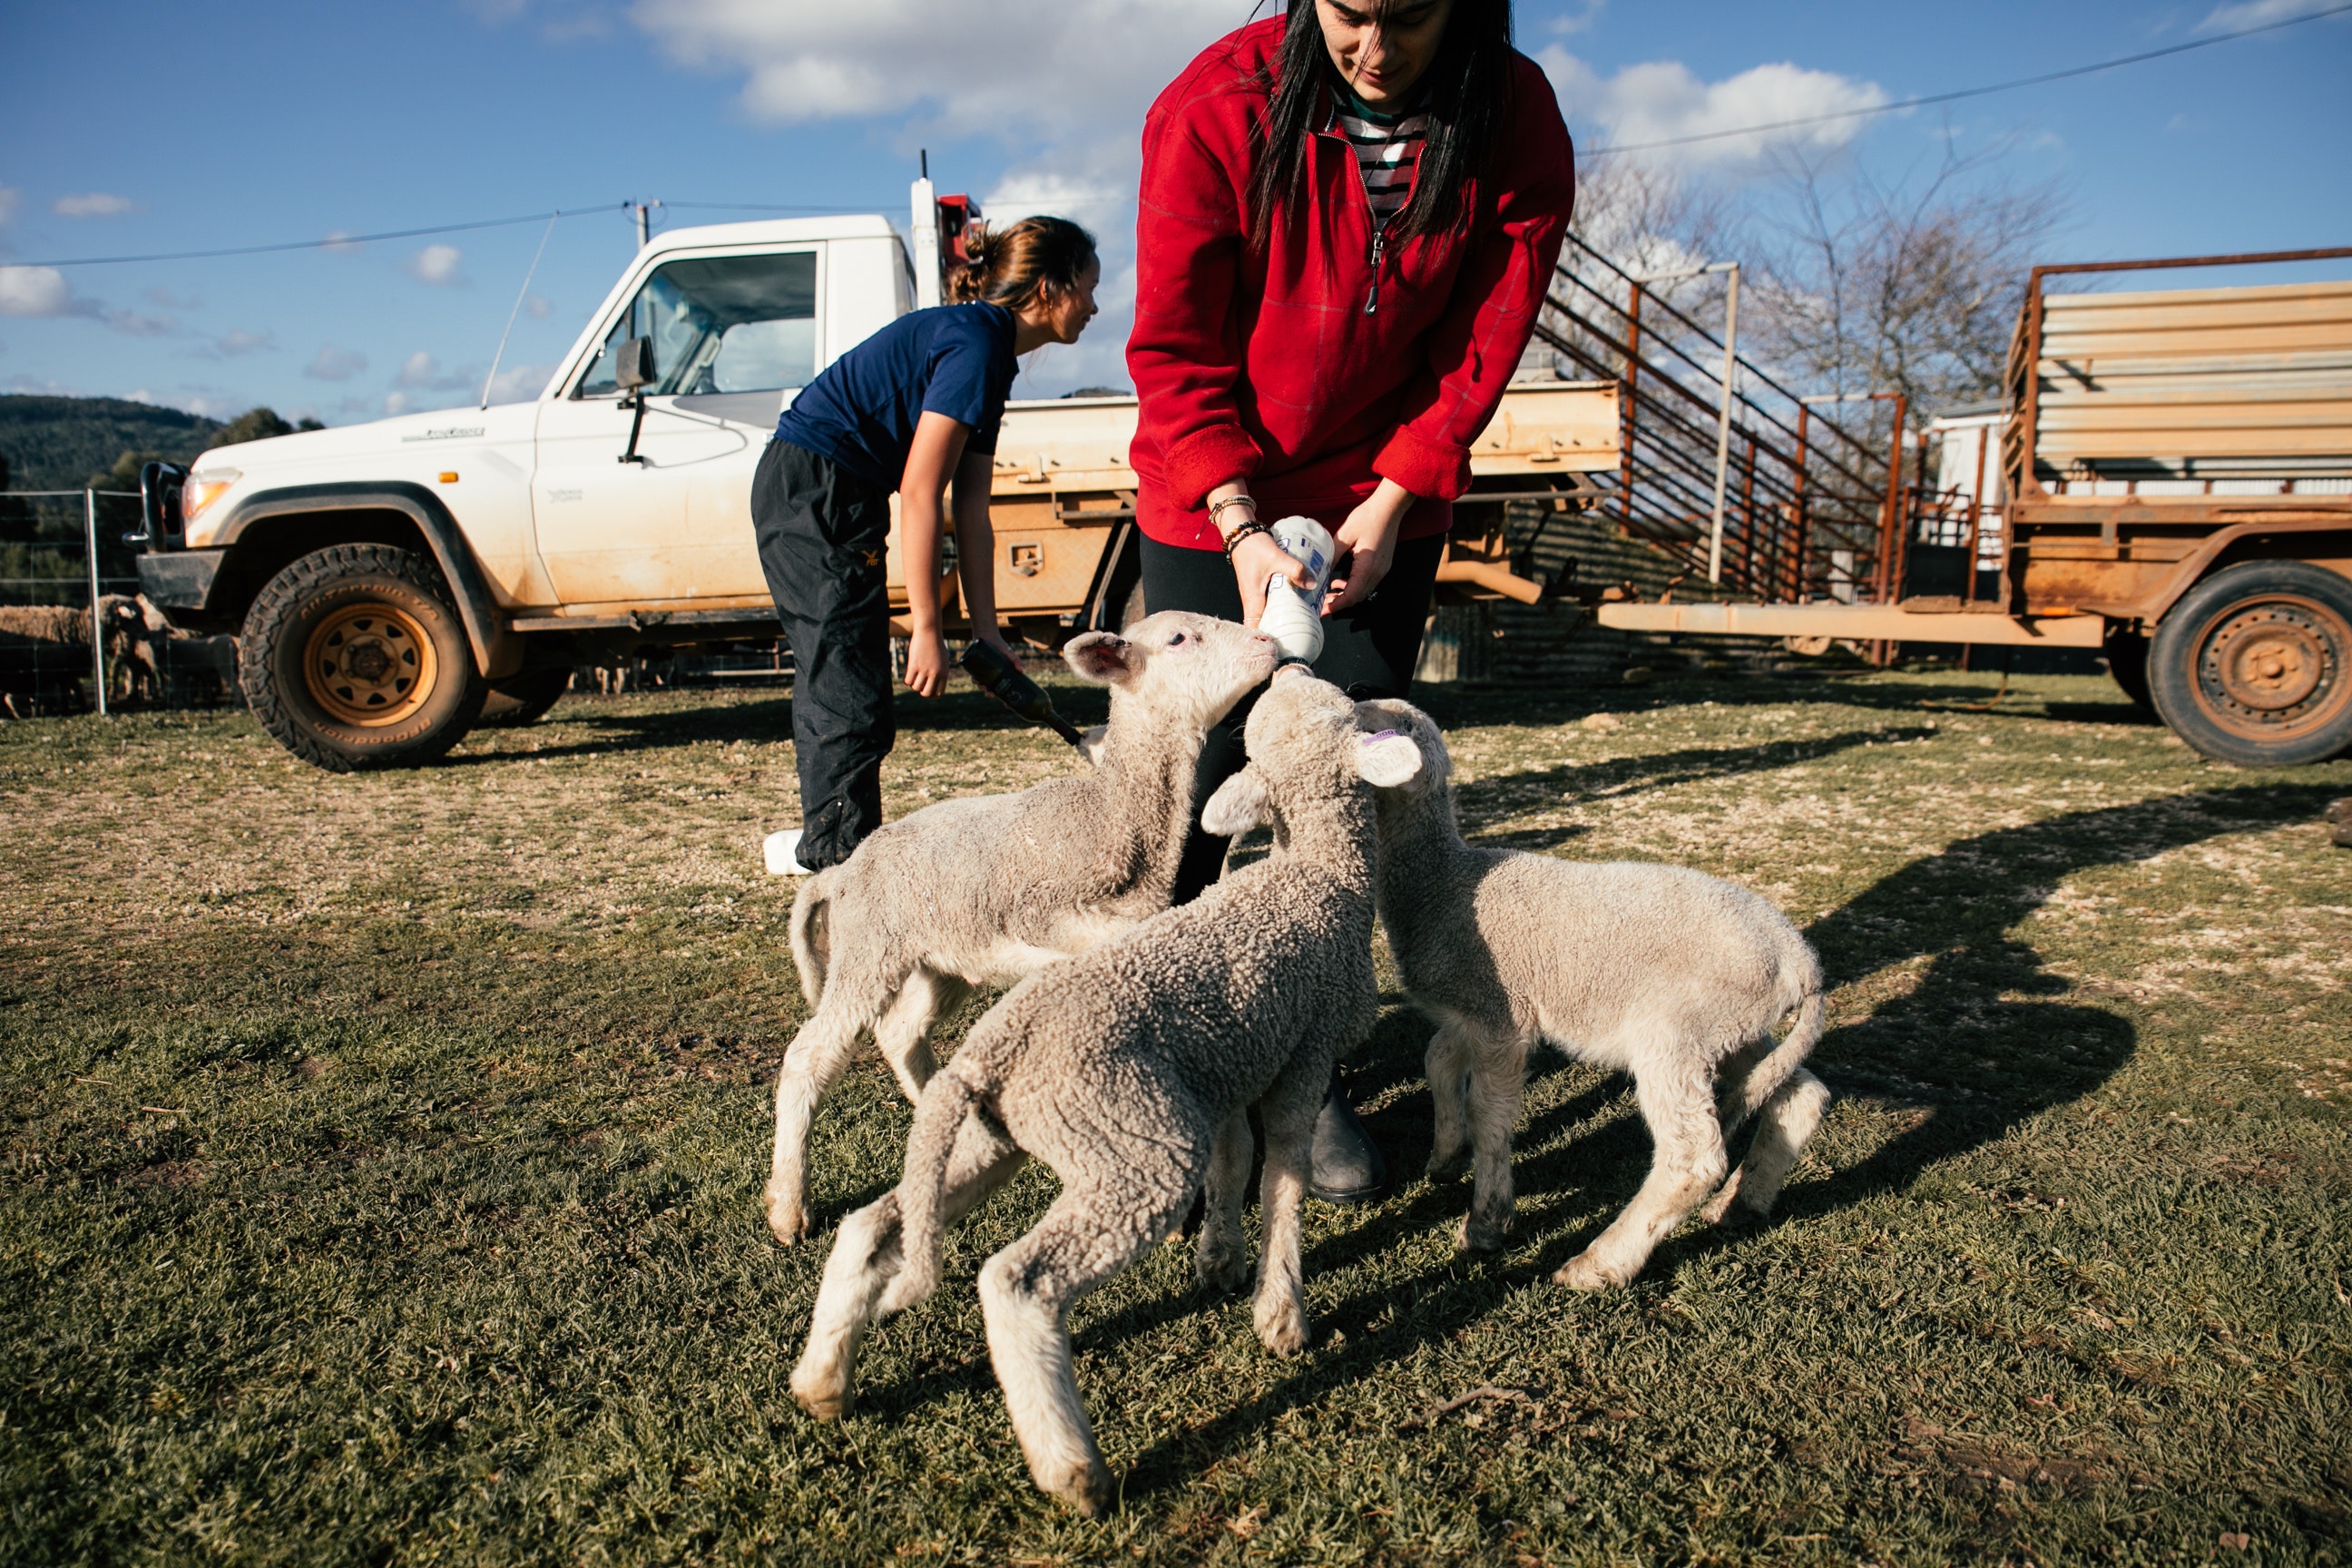 BEST OF 2021: The one, two, threes of successfully raising orphan lambs